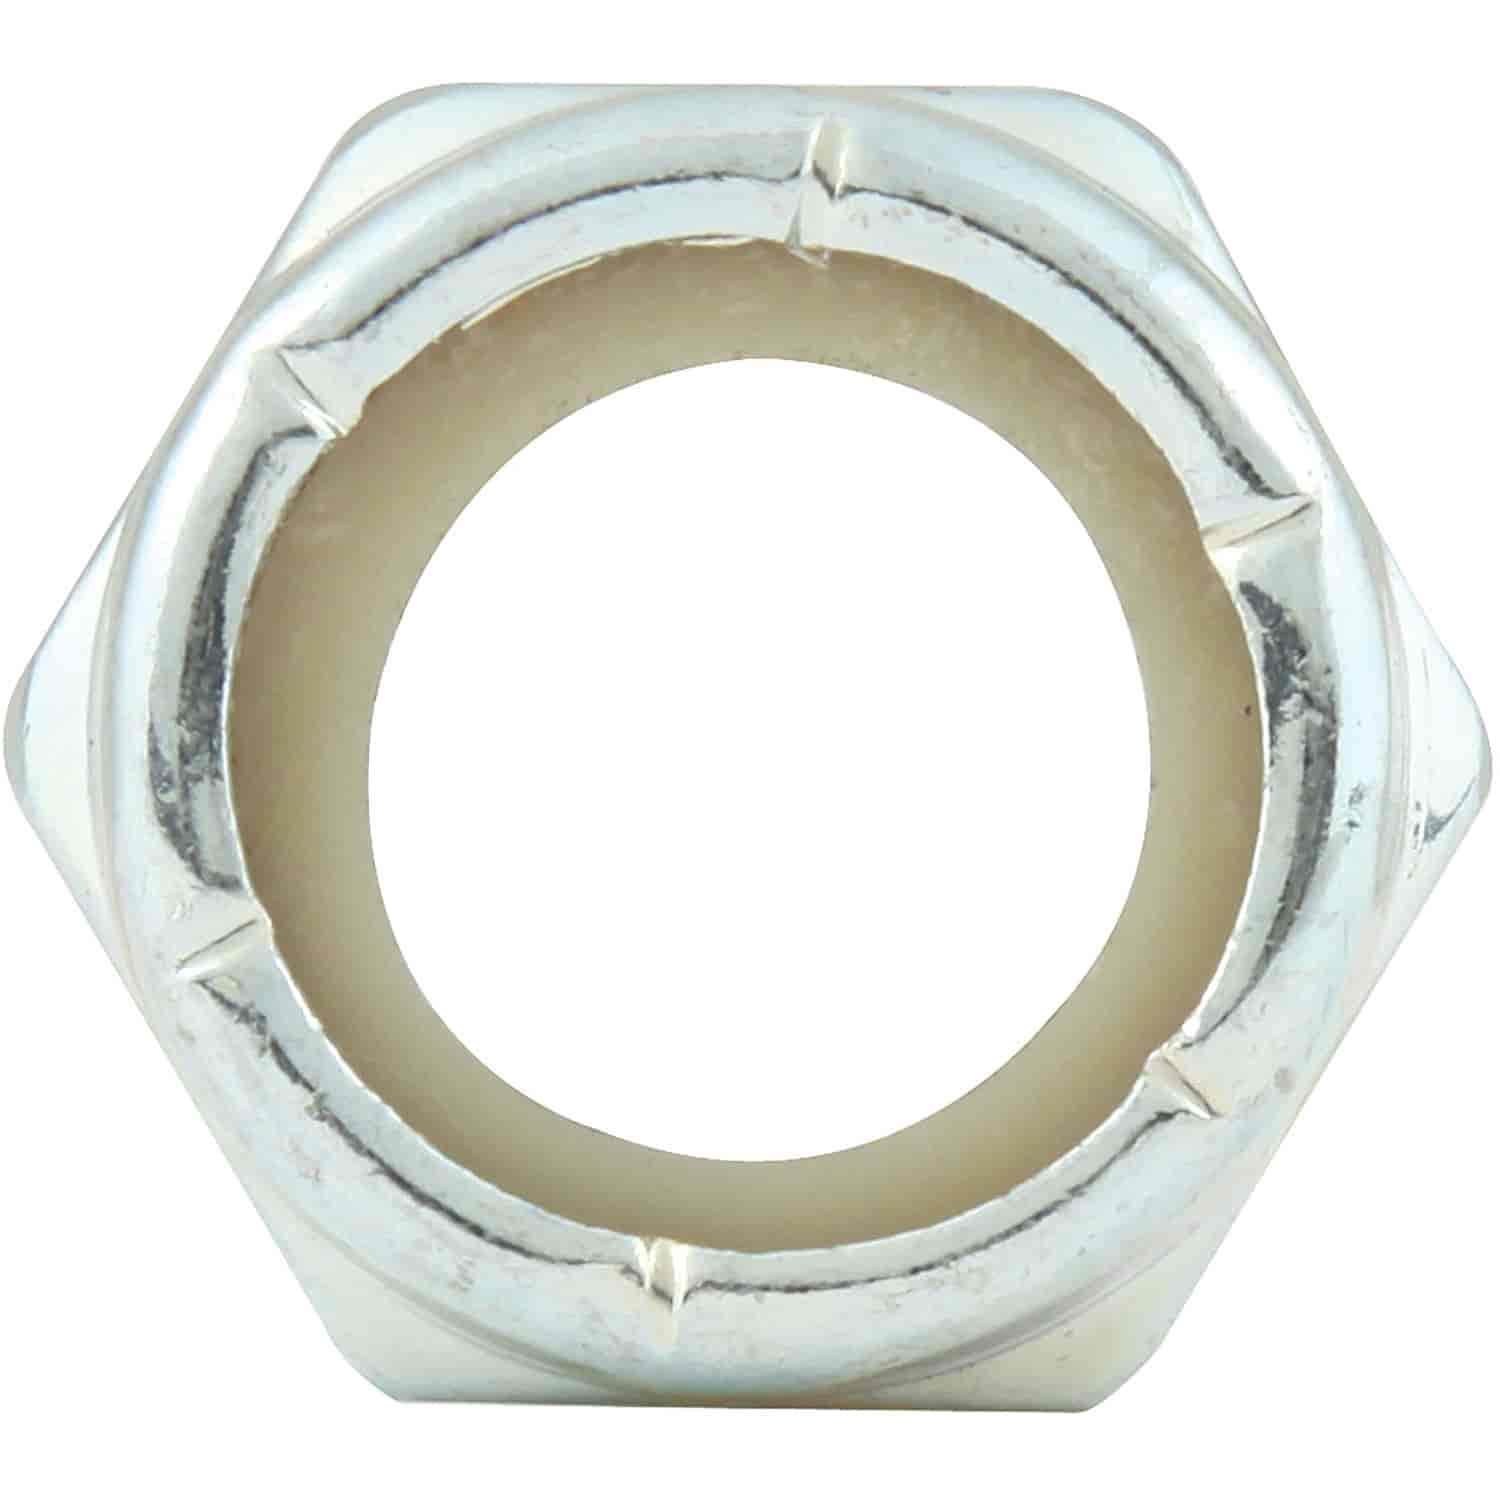 Fine Thread Hex Nuts Thin With Nylon Inserts